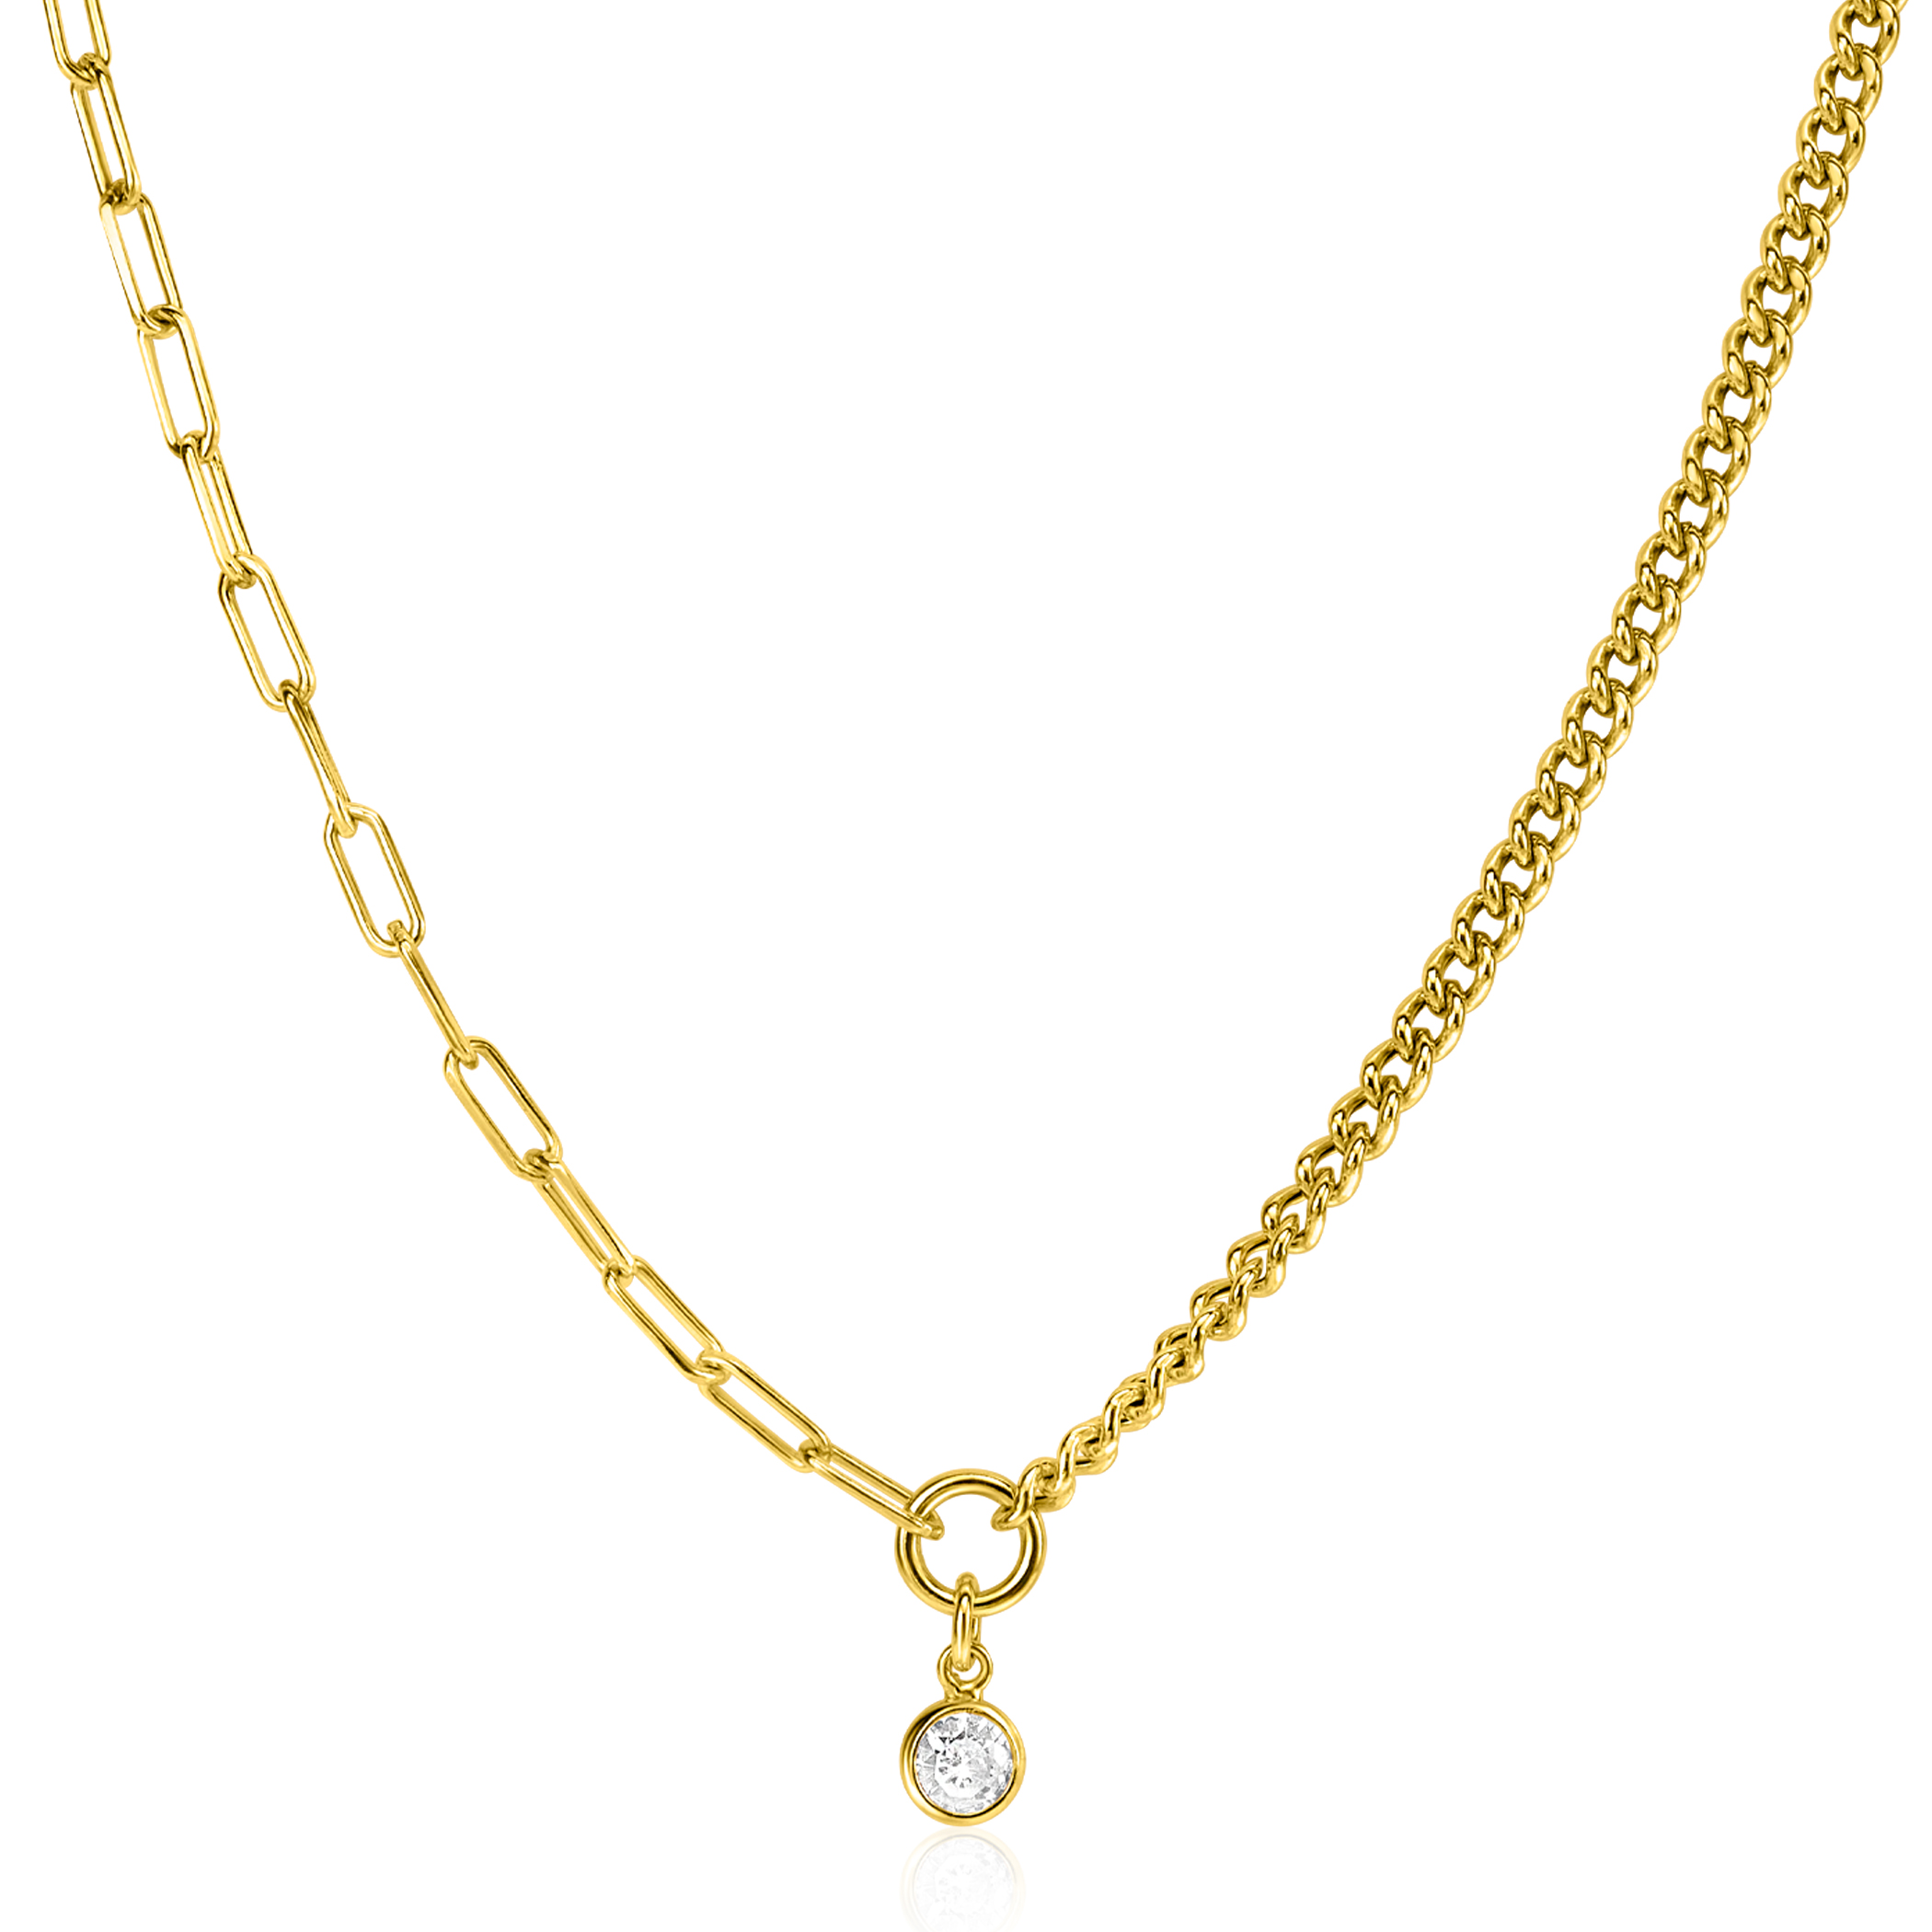 ZINZI Gold Plated Sterling Silver Necklace with 2 Trendy Chains Combined: Curb and Paperclip Chain. With a Dangling White Zirconia 40-45cm ZIC2480